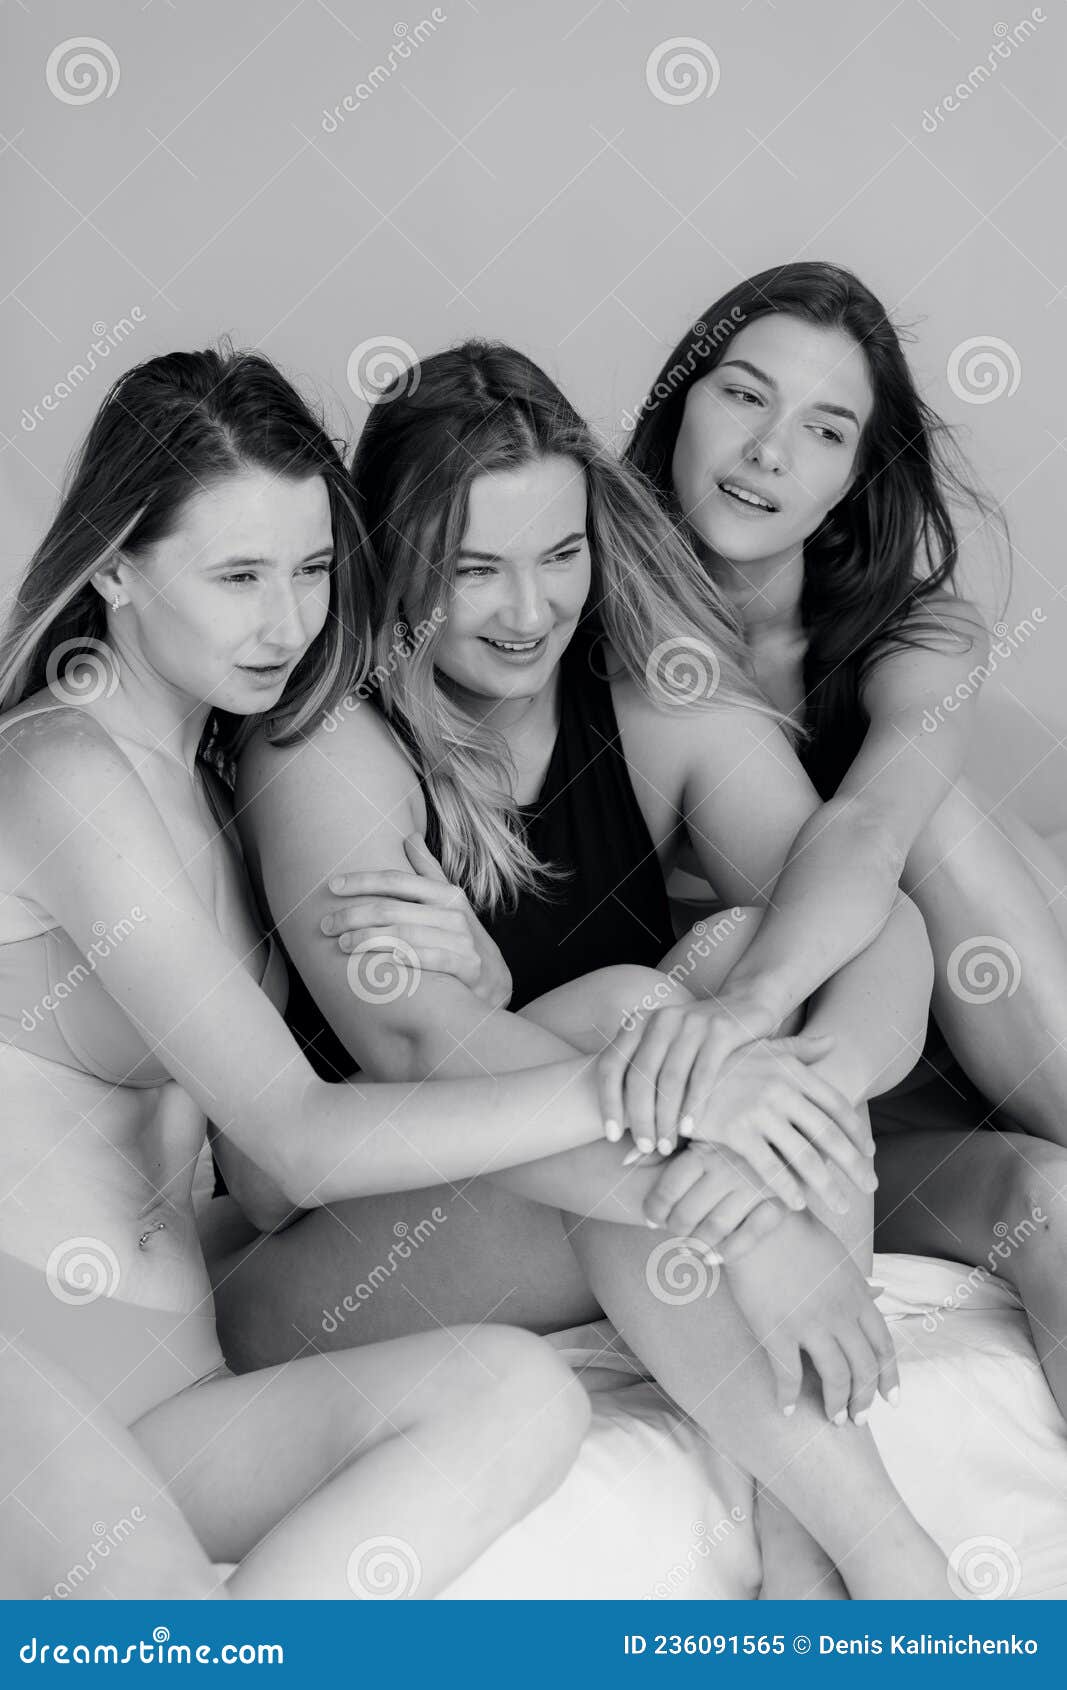 Group of Women Success, Diversity, Beauty, Body Positive and People Concept Stock Image image